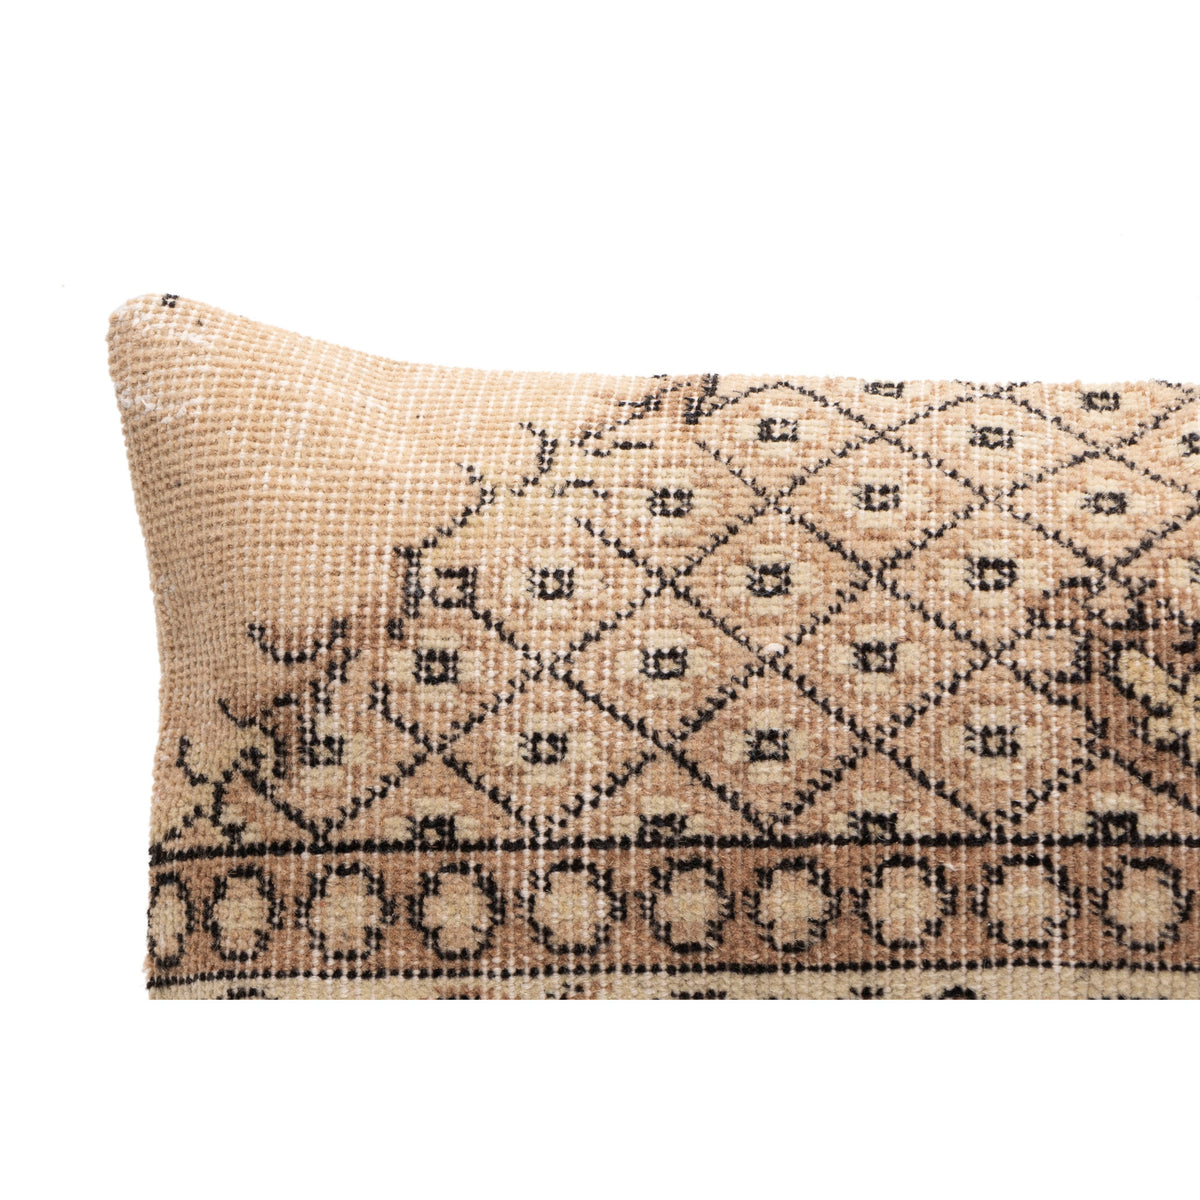 Decorative Rug Pillow Cover 12" x 20"